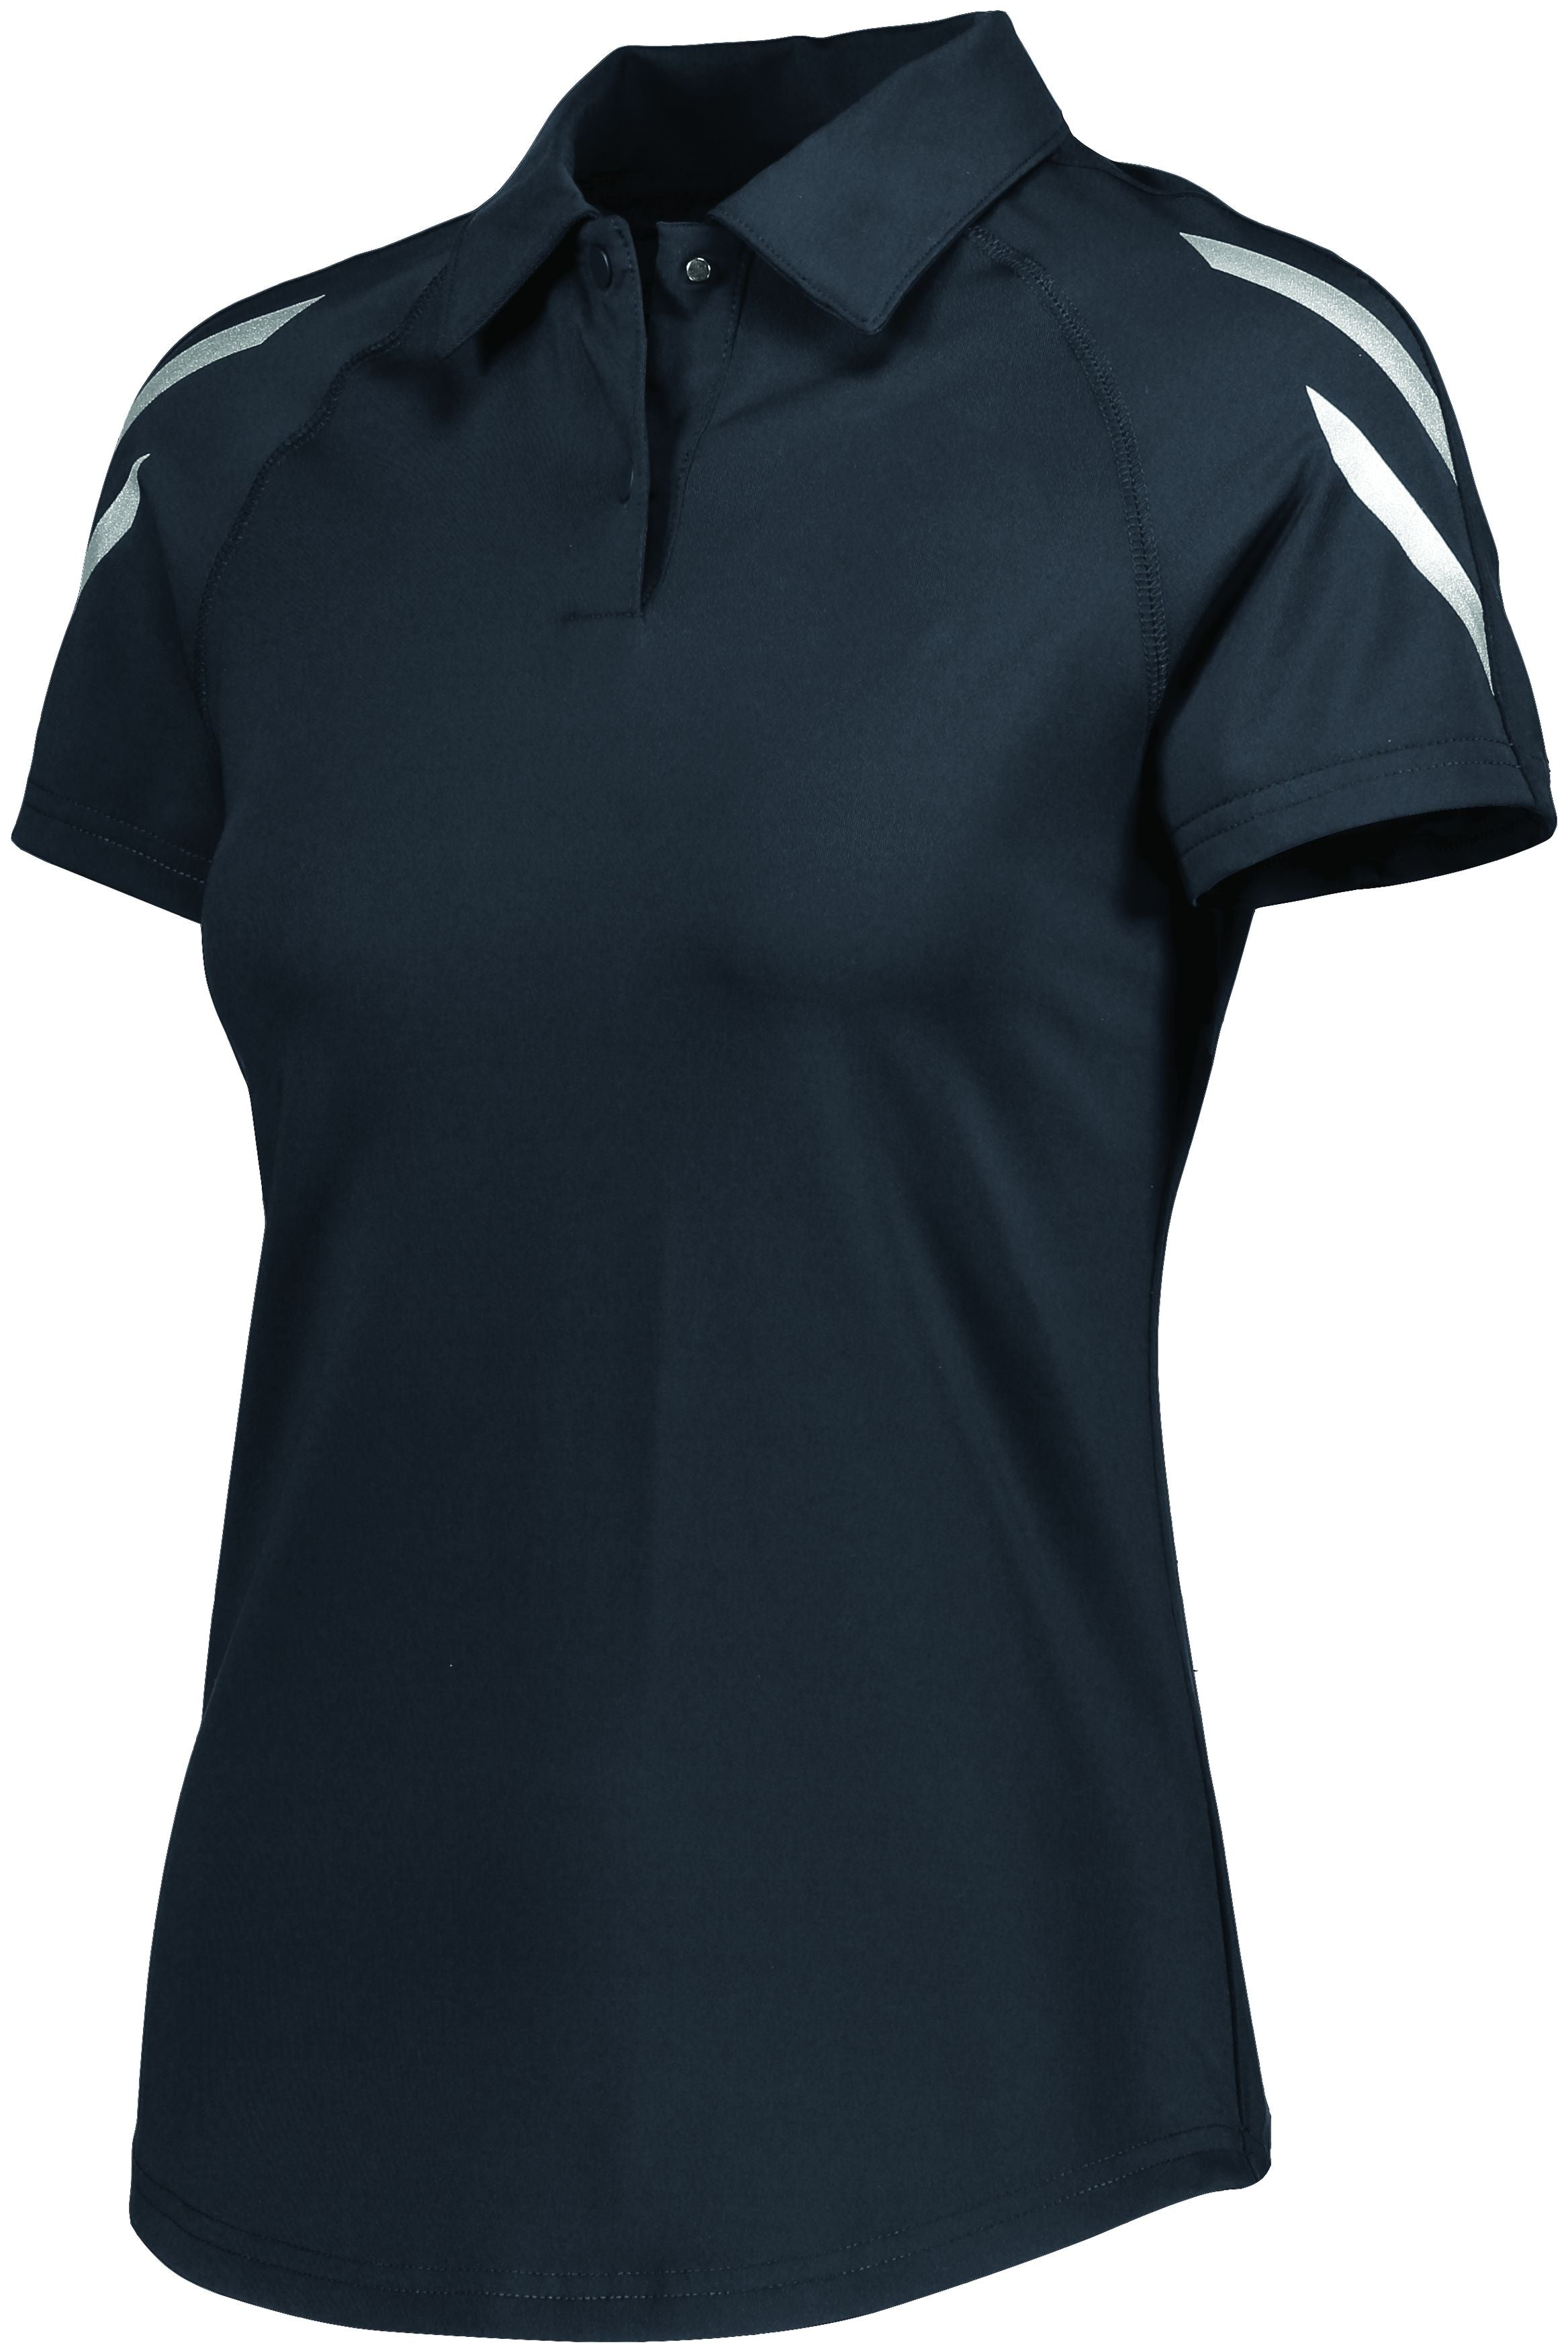 Holloway Ladies Flux Polo in Carbon  -Part of the Ladies, Ladies-Polo, Polos, Holloway, Shirts, Flux-Collection, Corporate-Collection product lines at KanaleyCreations.com